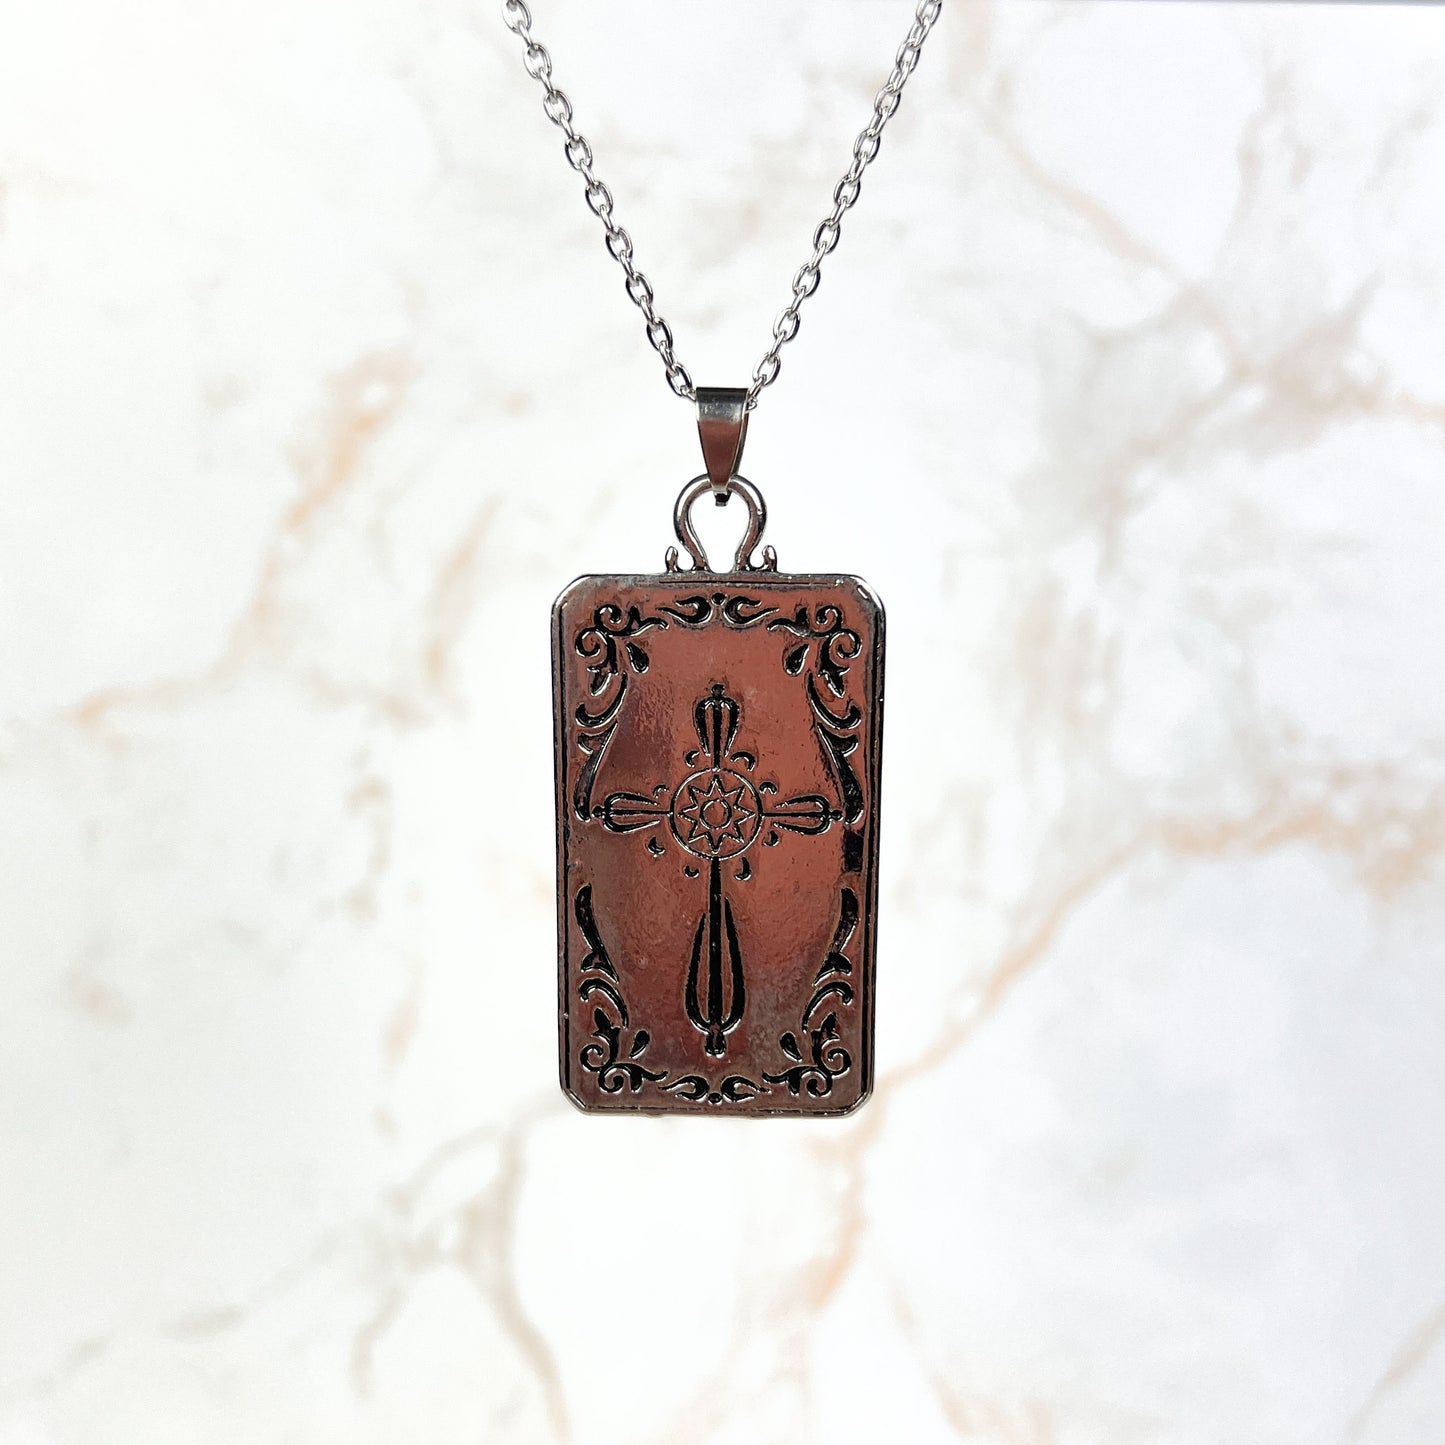 Wheel of fortune tarot arcana necklace with a reversible pendant Baguette Magick